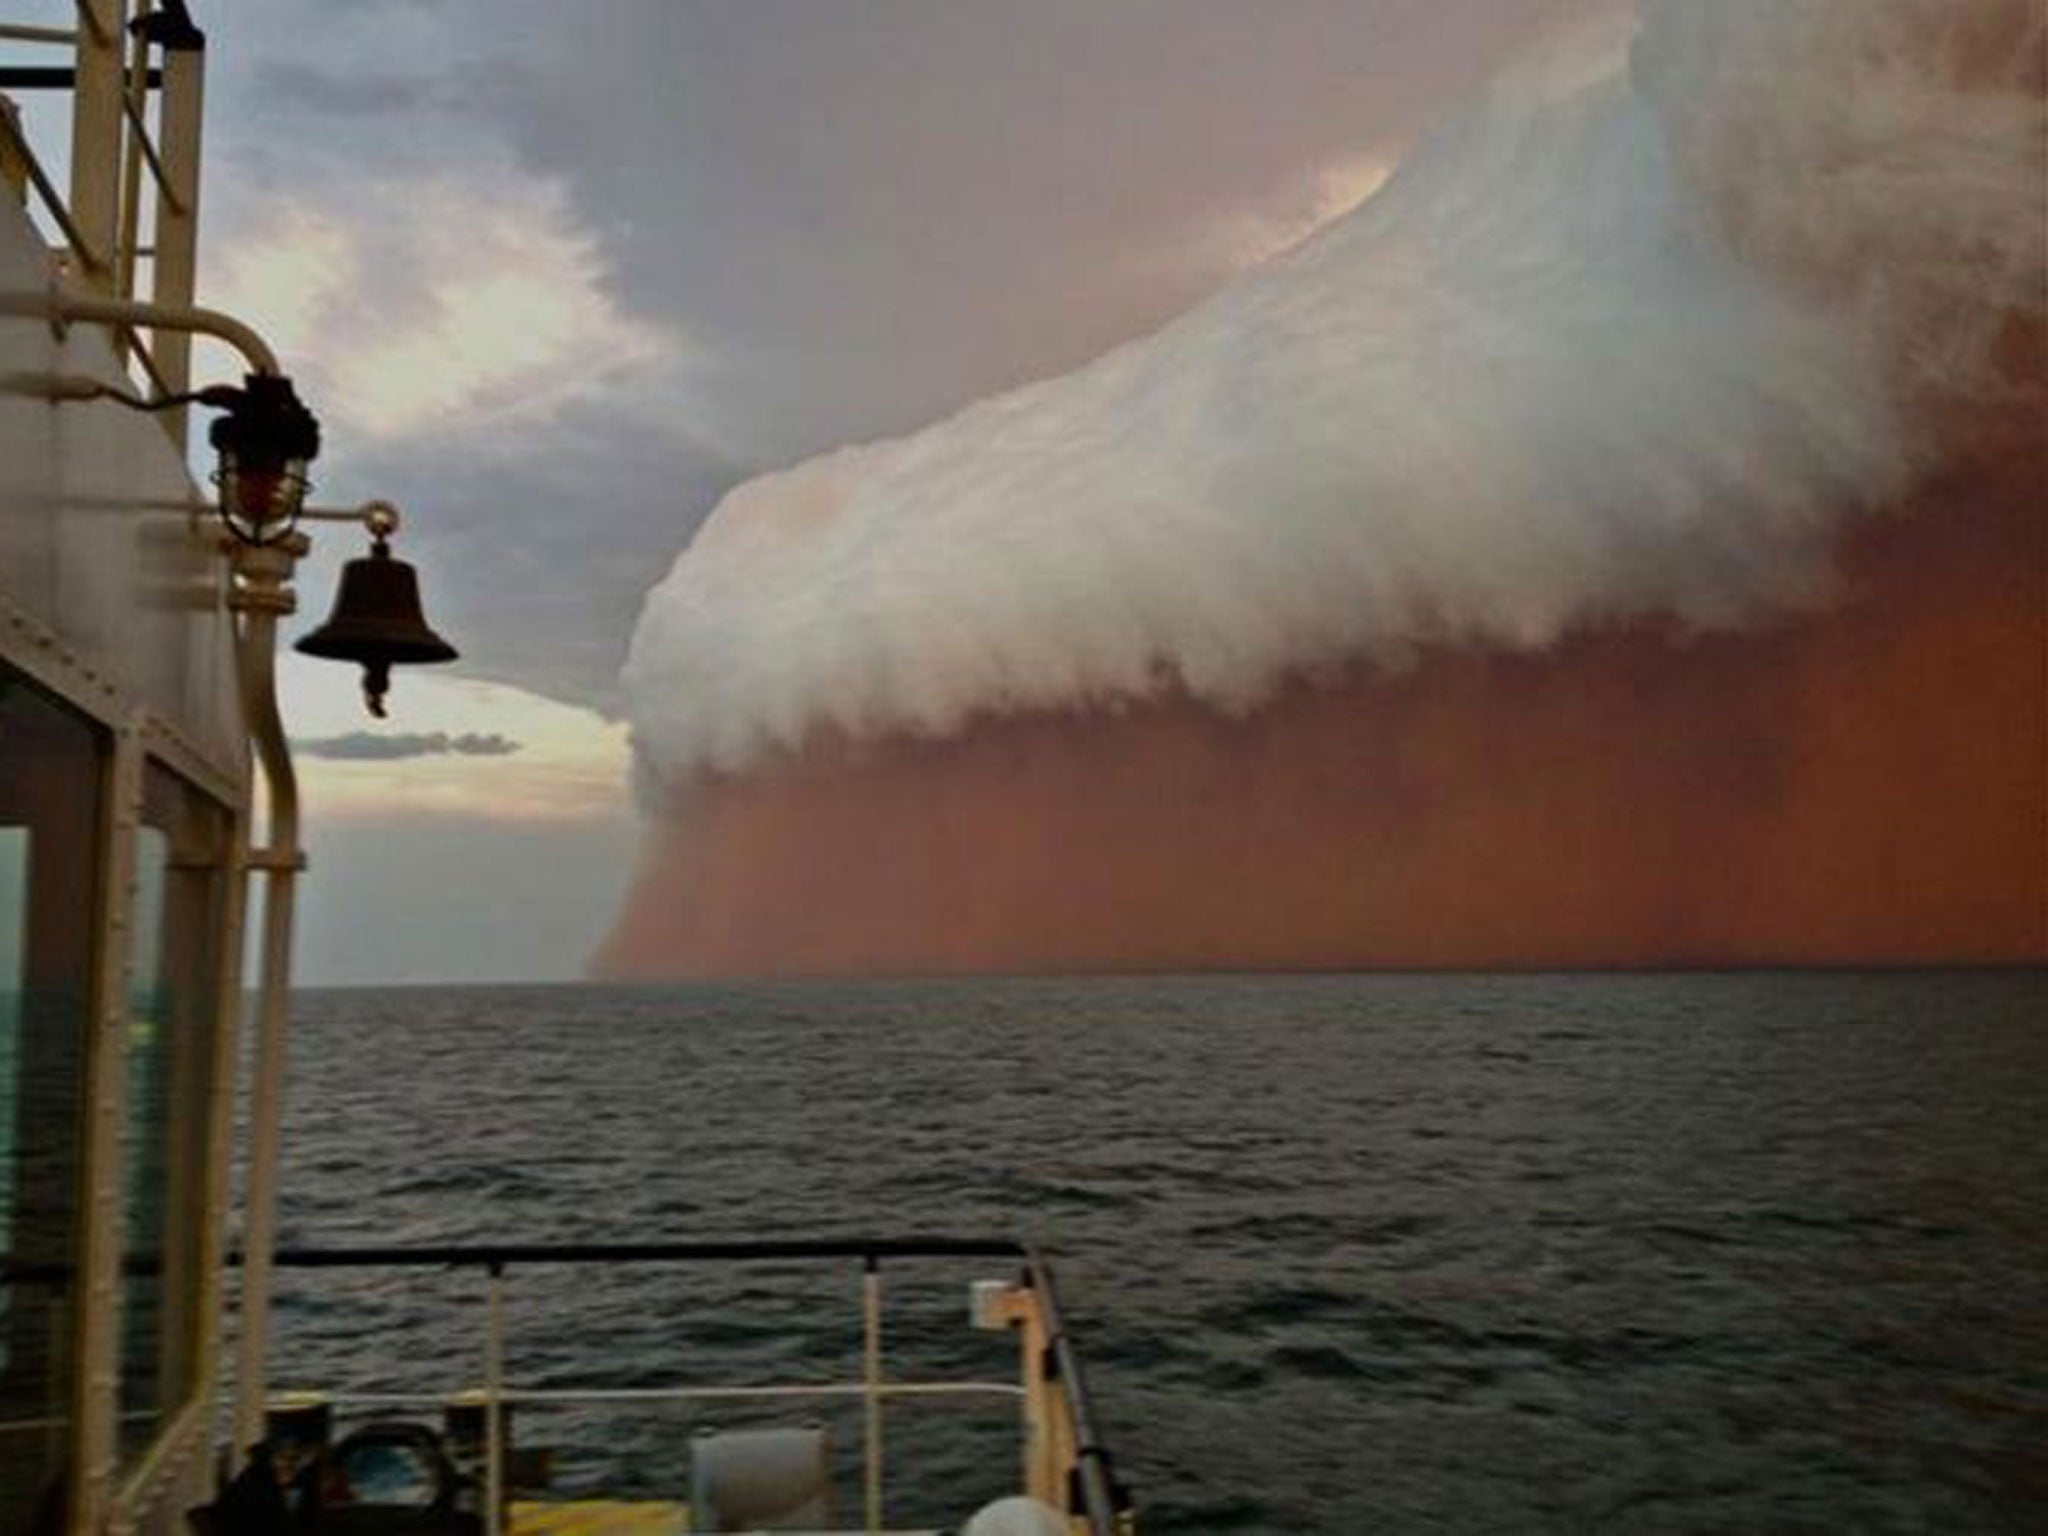 A towering red dust storm over the ocean ahead of the cyclone approaching Onslow on the West Australian coast